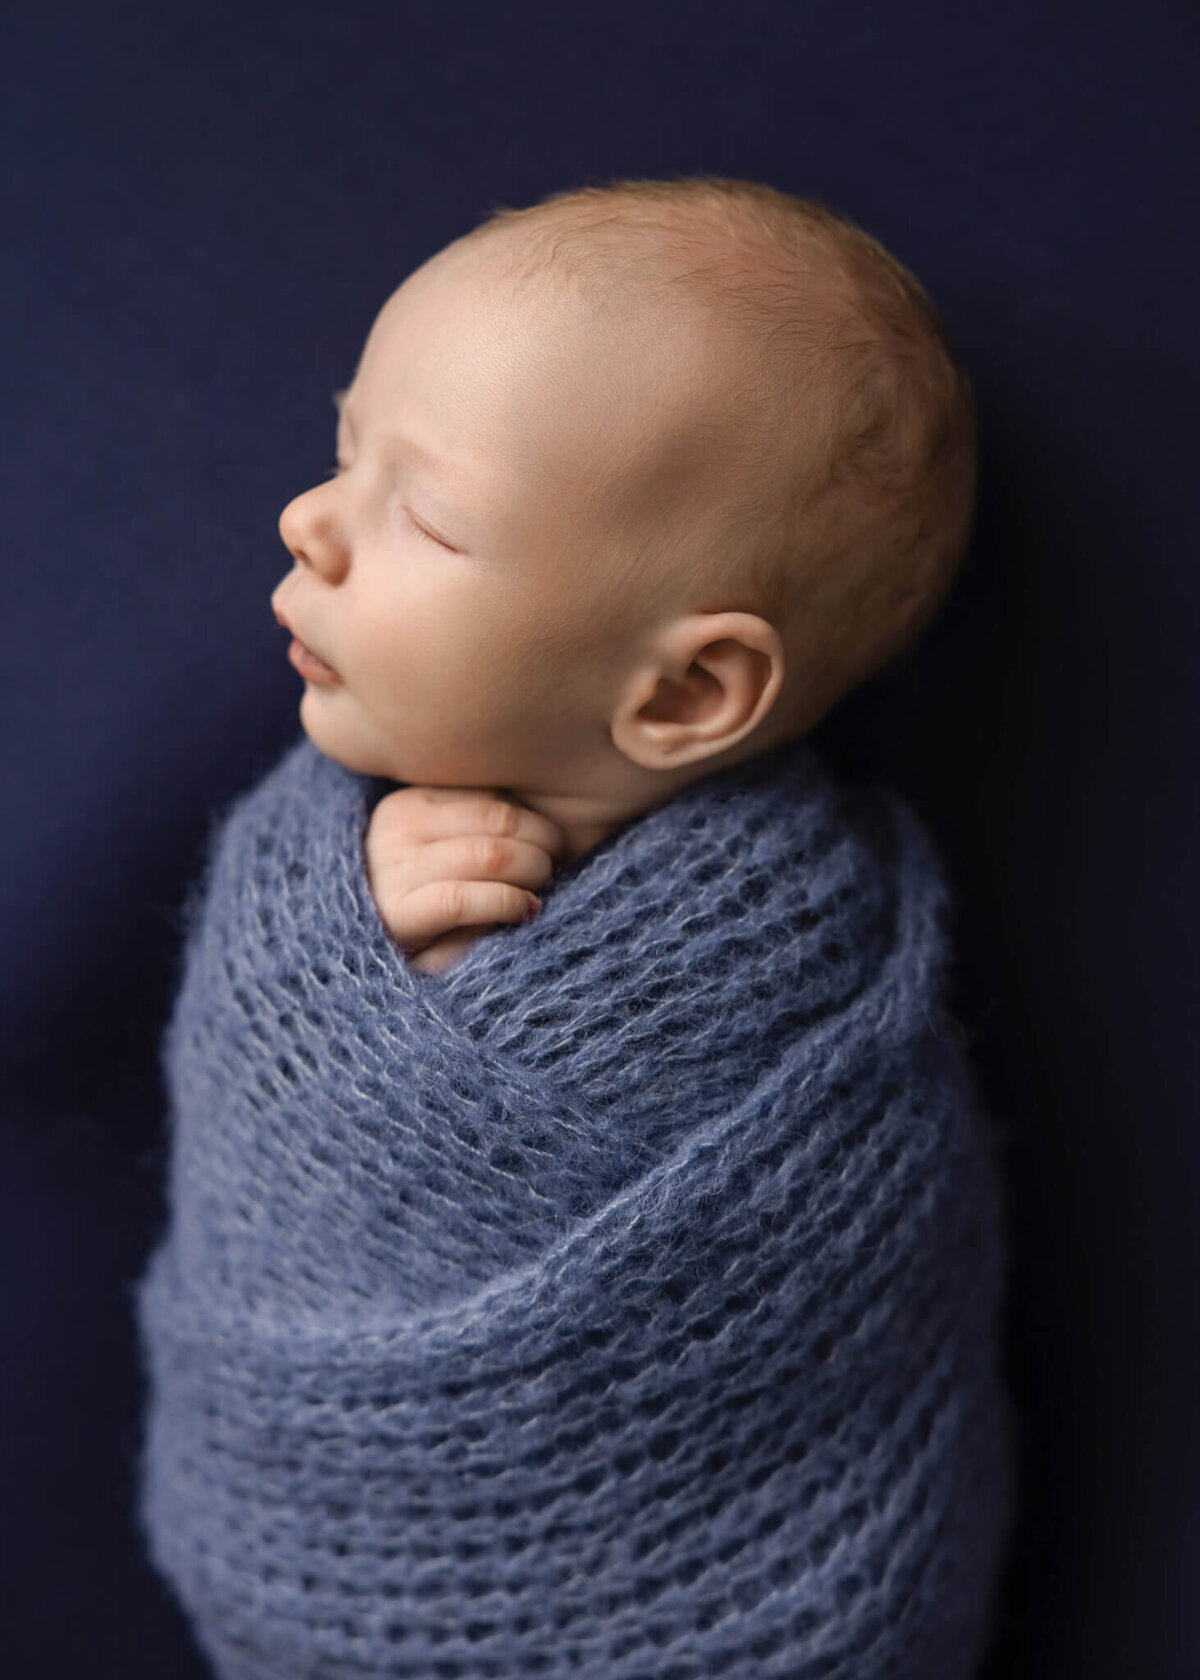 close up of newborn baby wrapped in blue kntted wrap asleep on blue fabric